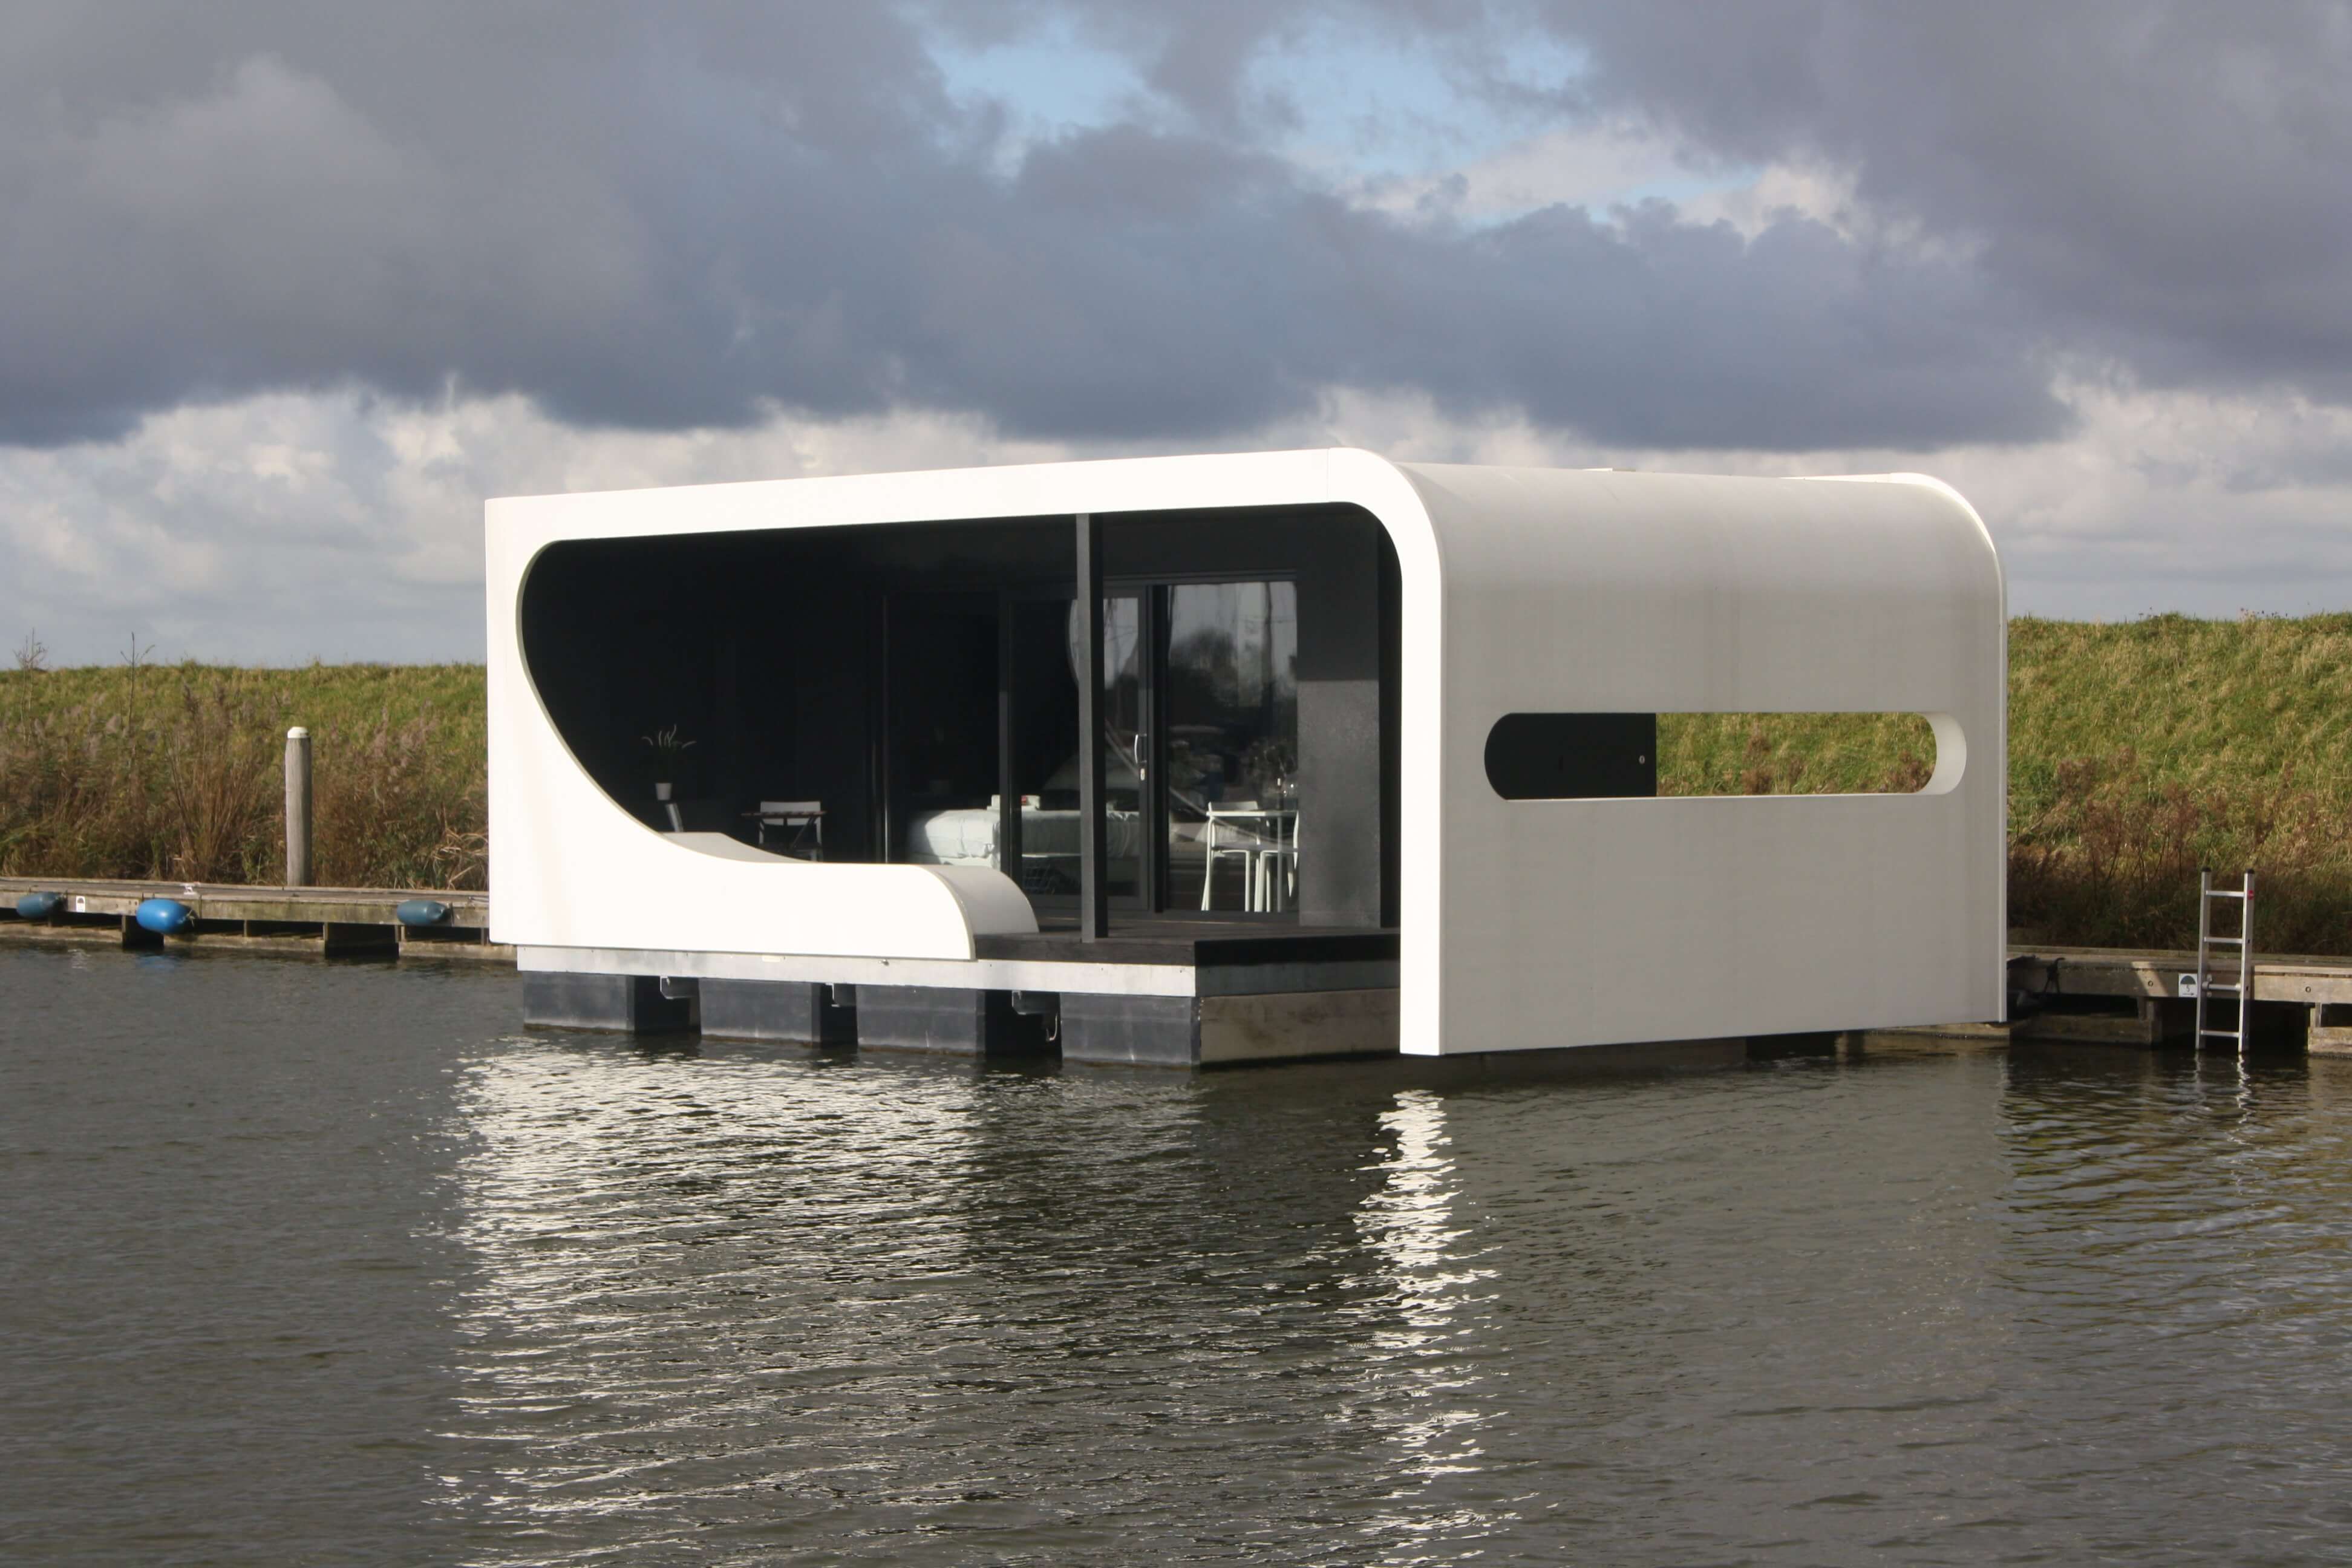 Tiny houseboat from The Netherlands